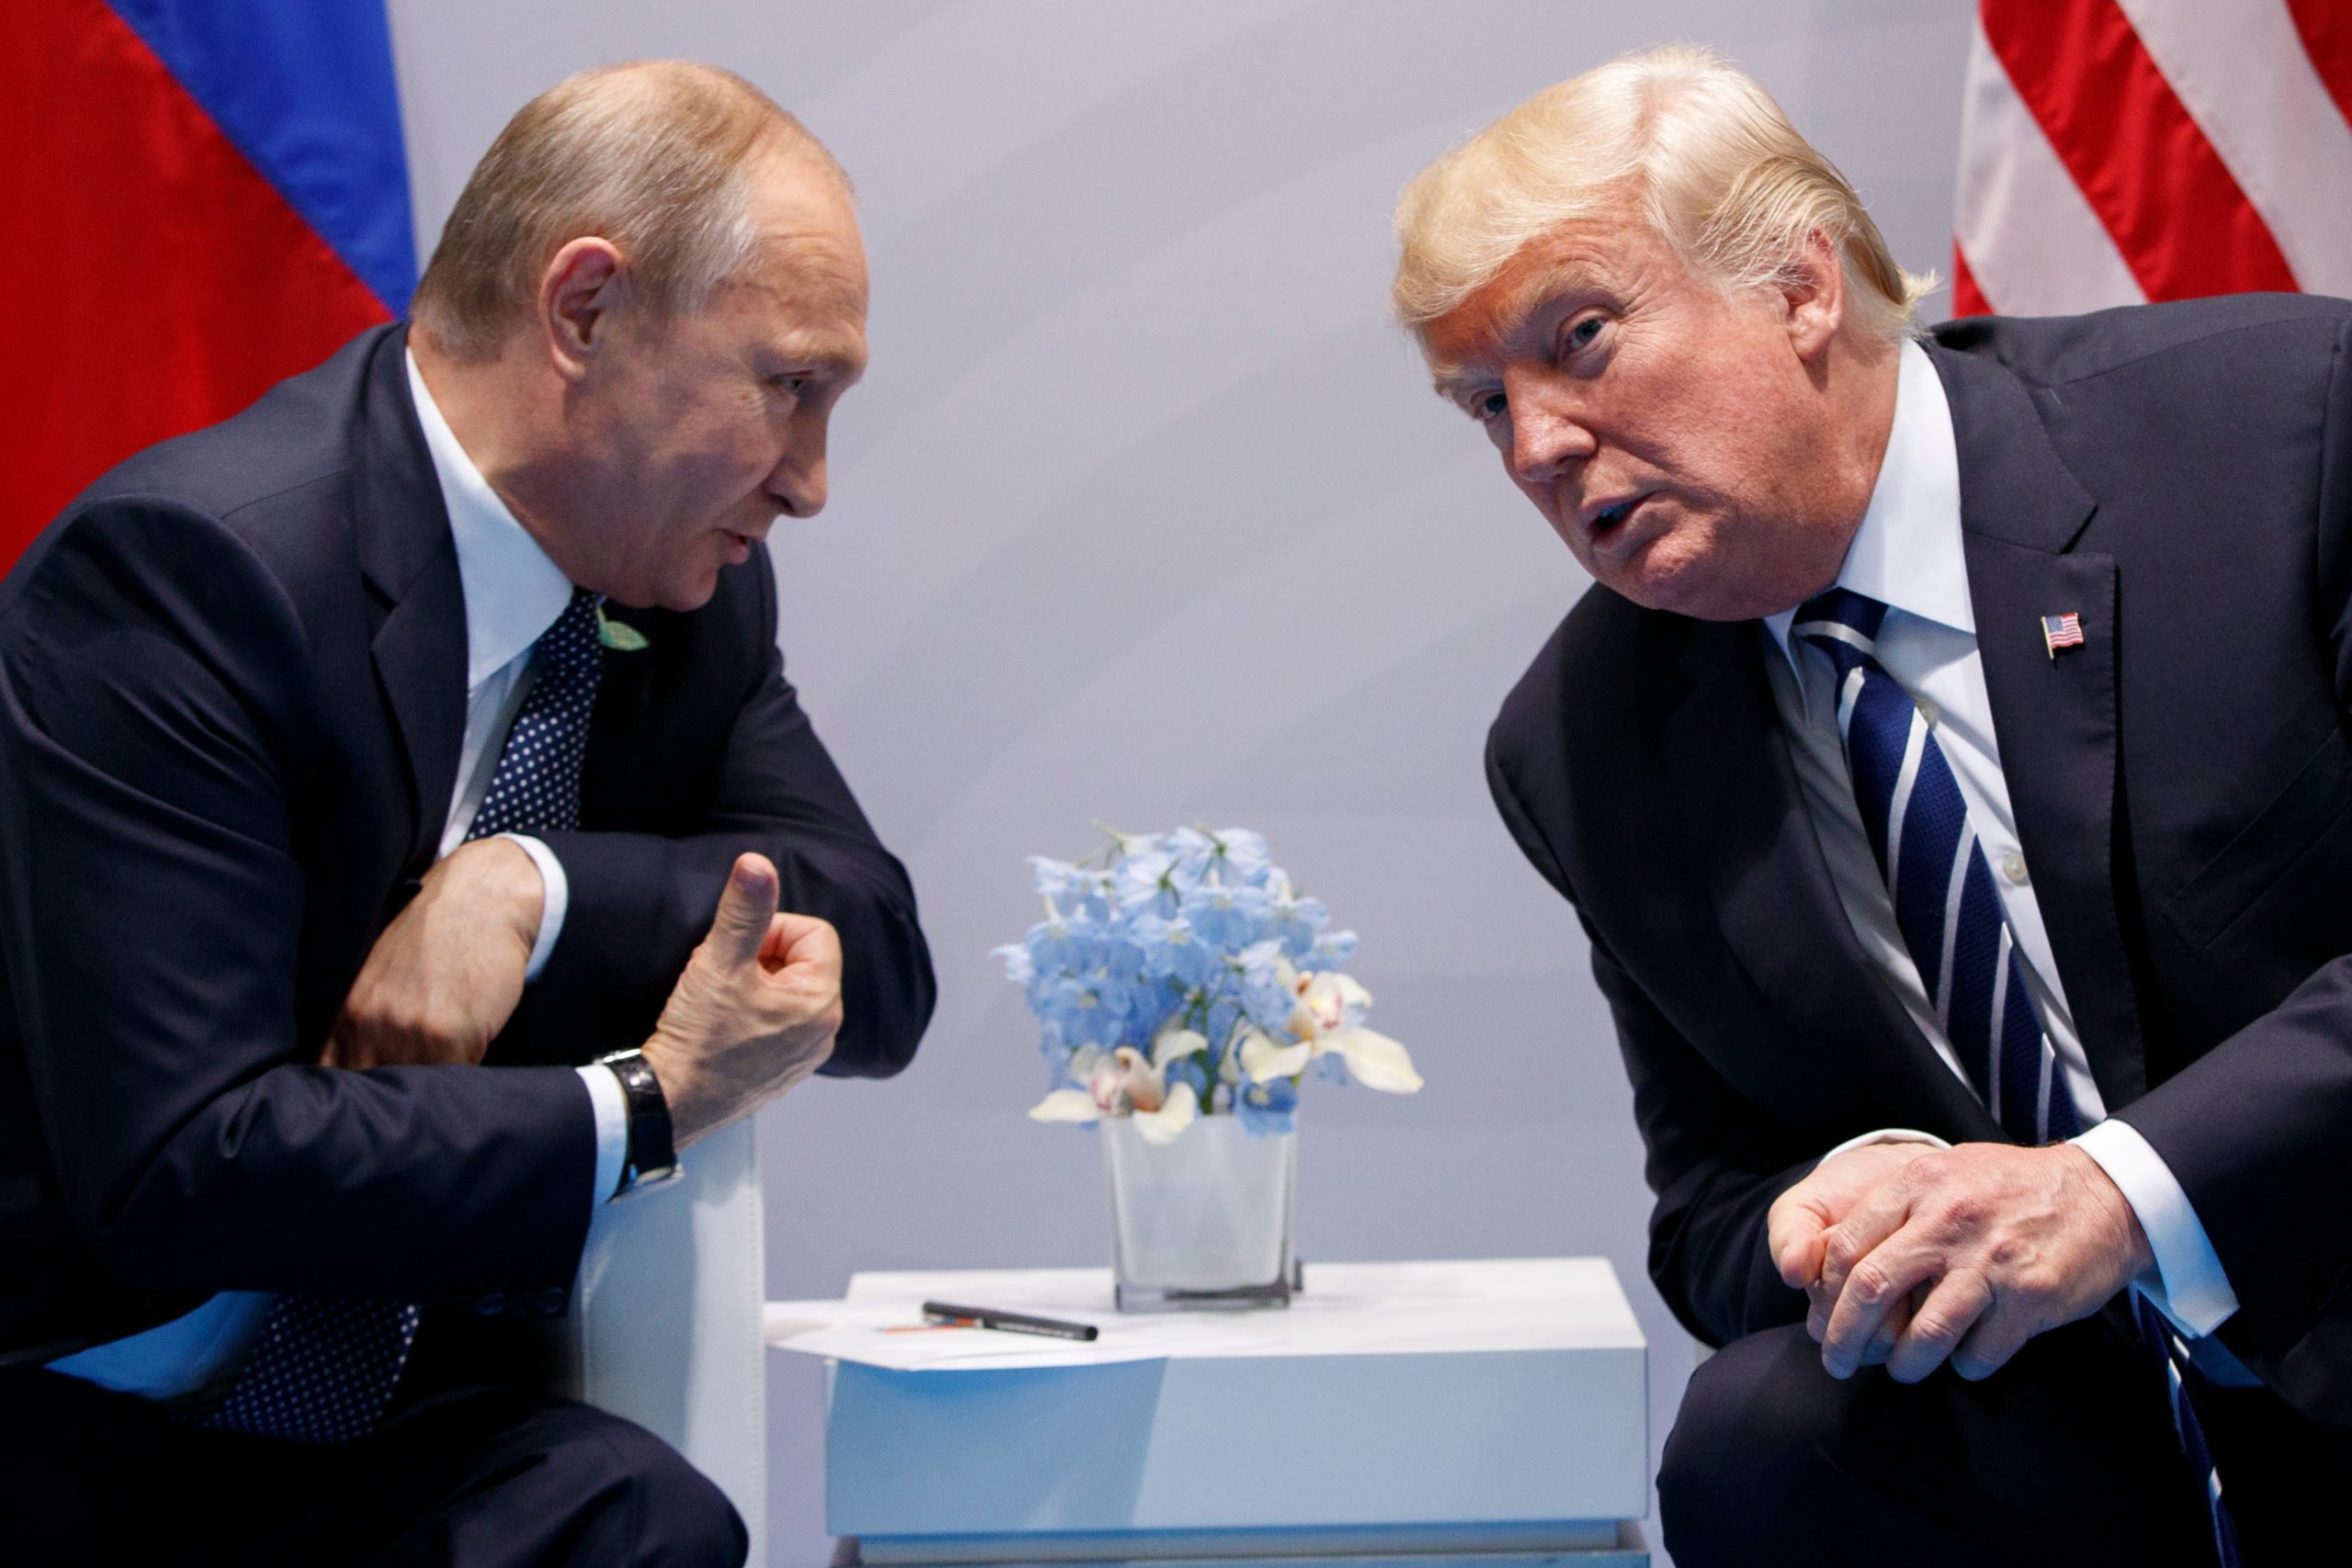 Russia Tried To Influence 2020 US Election - New Report